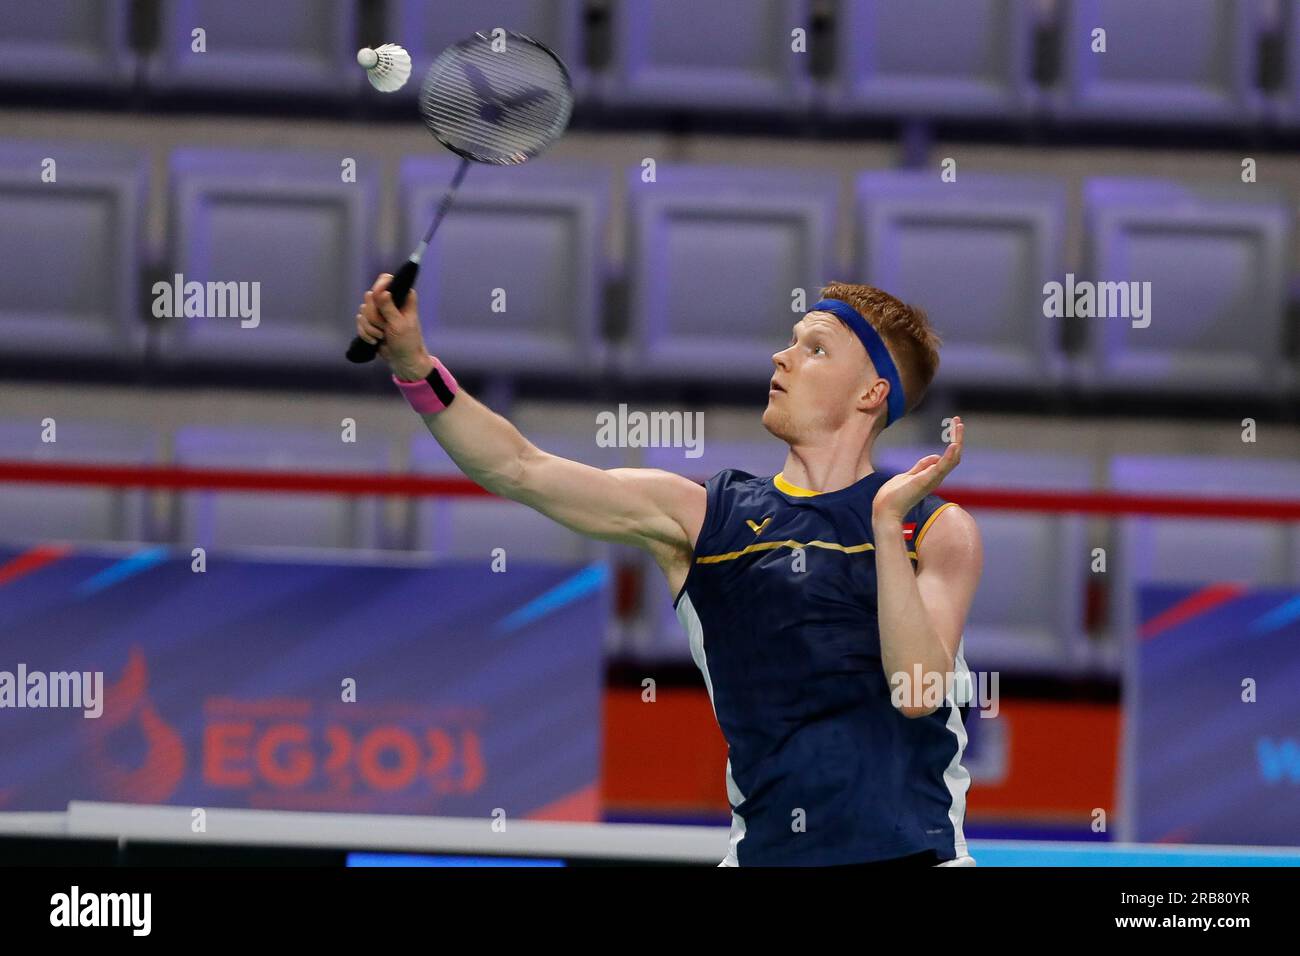 Tarnow, Slovenia. 26 June, 2023: Anders Antonsen of Denmark competes in the Badminton - Men's Single match during the European Games - Day 7 at Jaskolka Arena in Tarnow, Poland. June 26, 2023. (Photo by Nikola Krstic/Alamy) Stock Photo